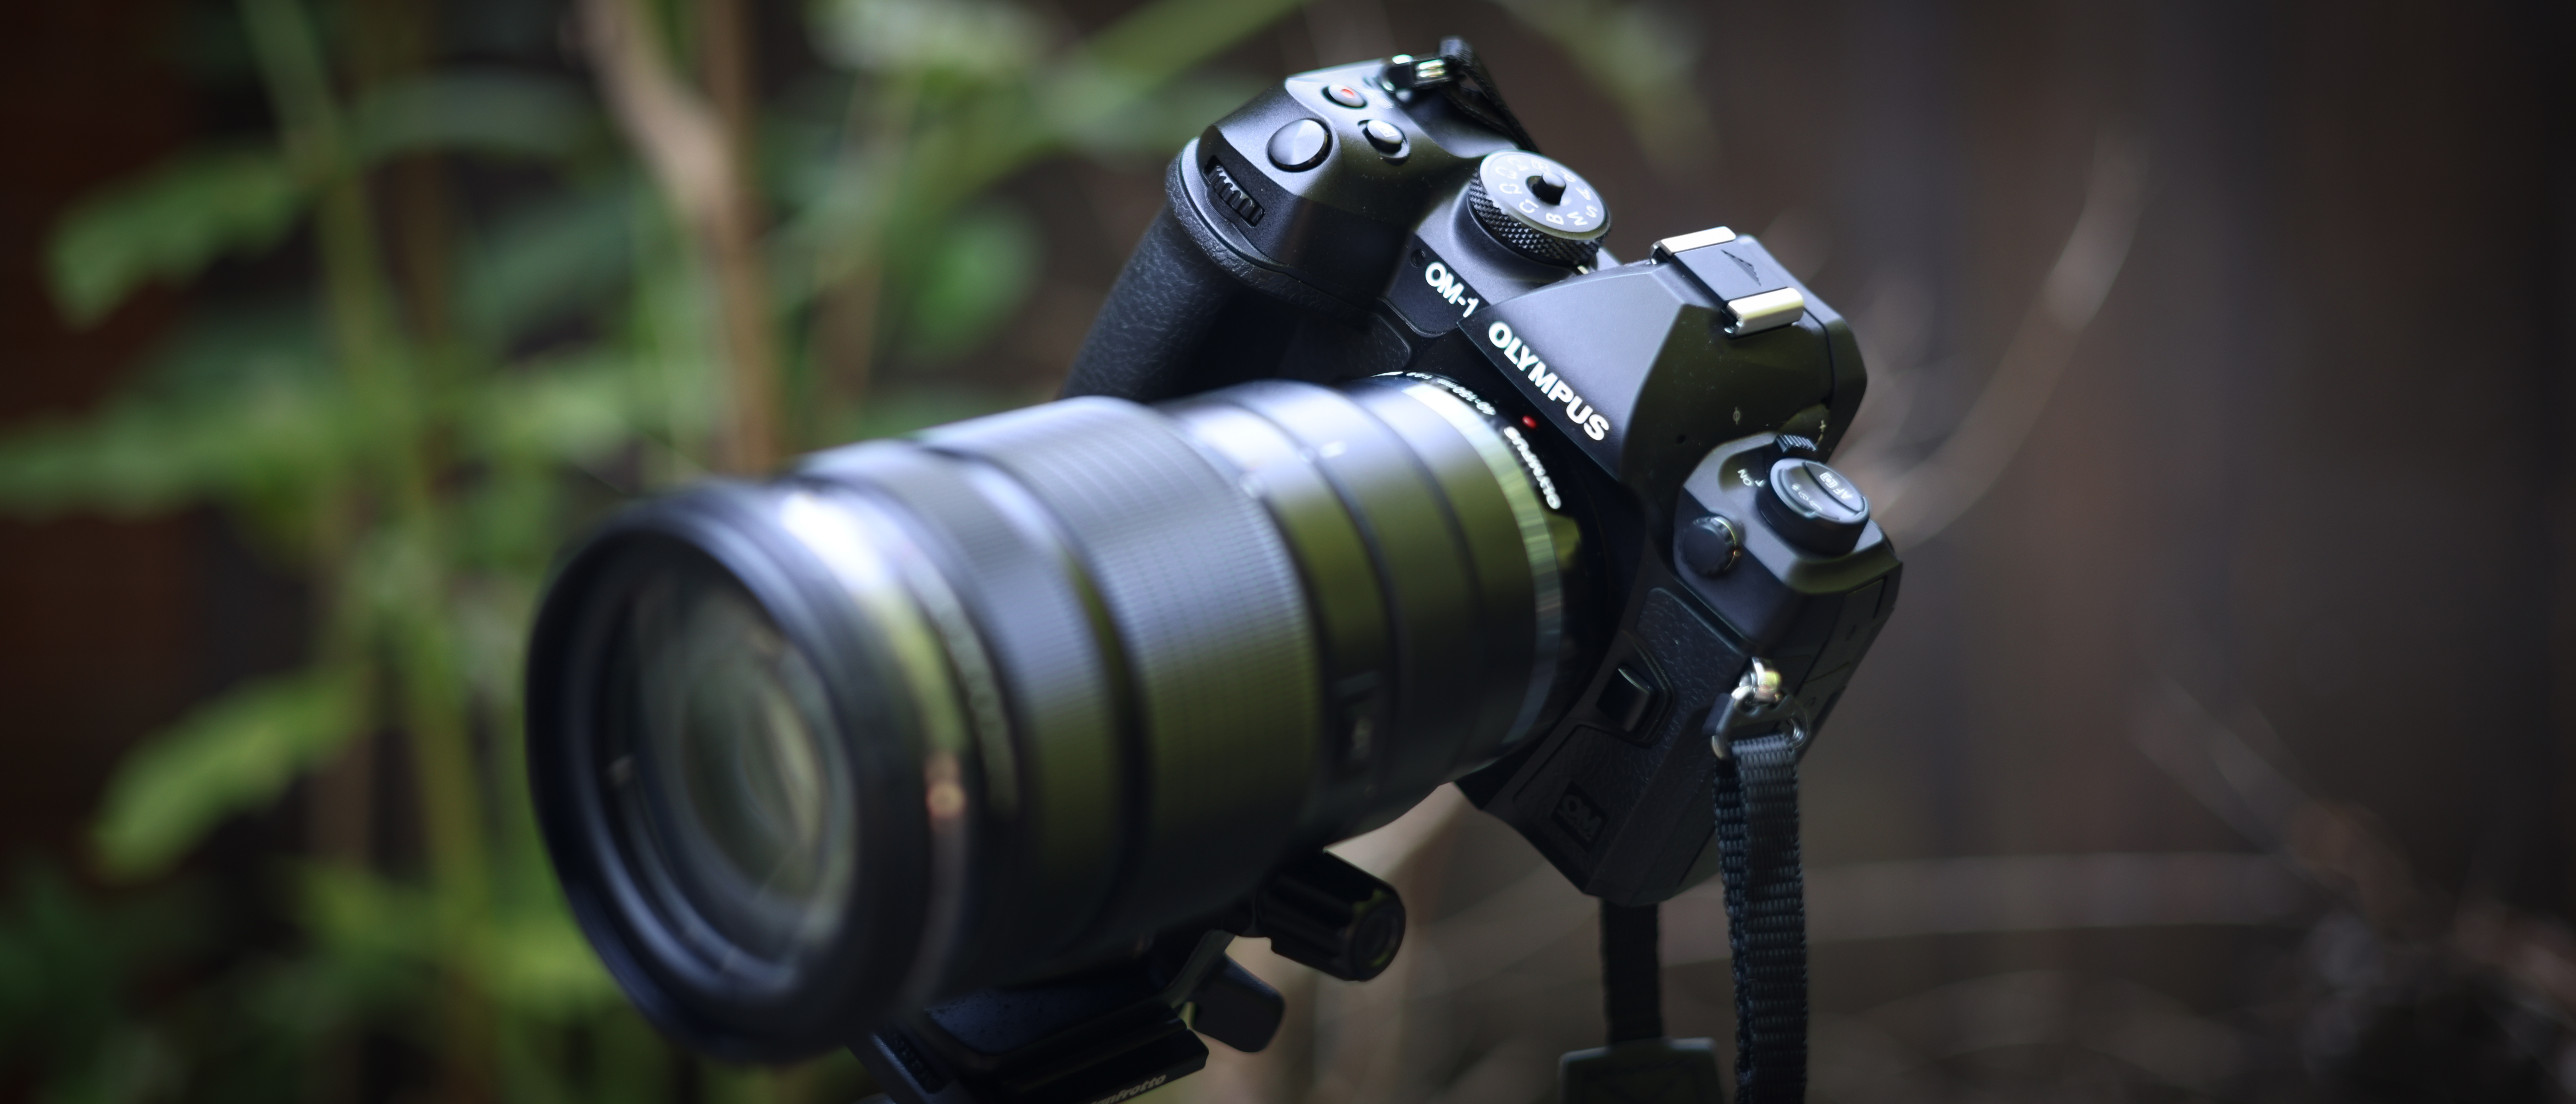 The Best Lenses for OM System OM1 and the Great Tech Inside